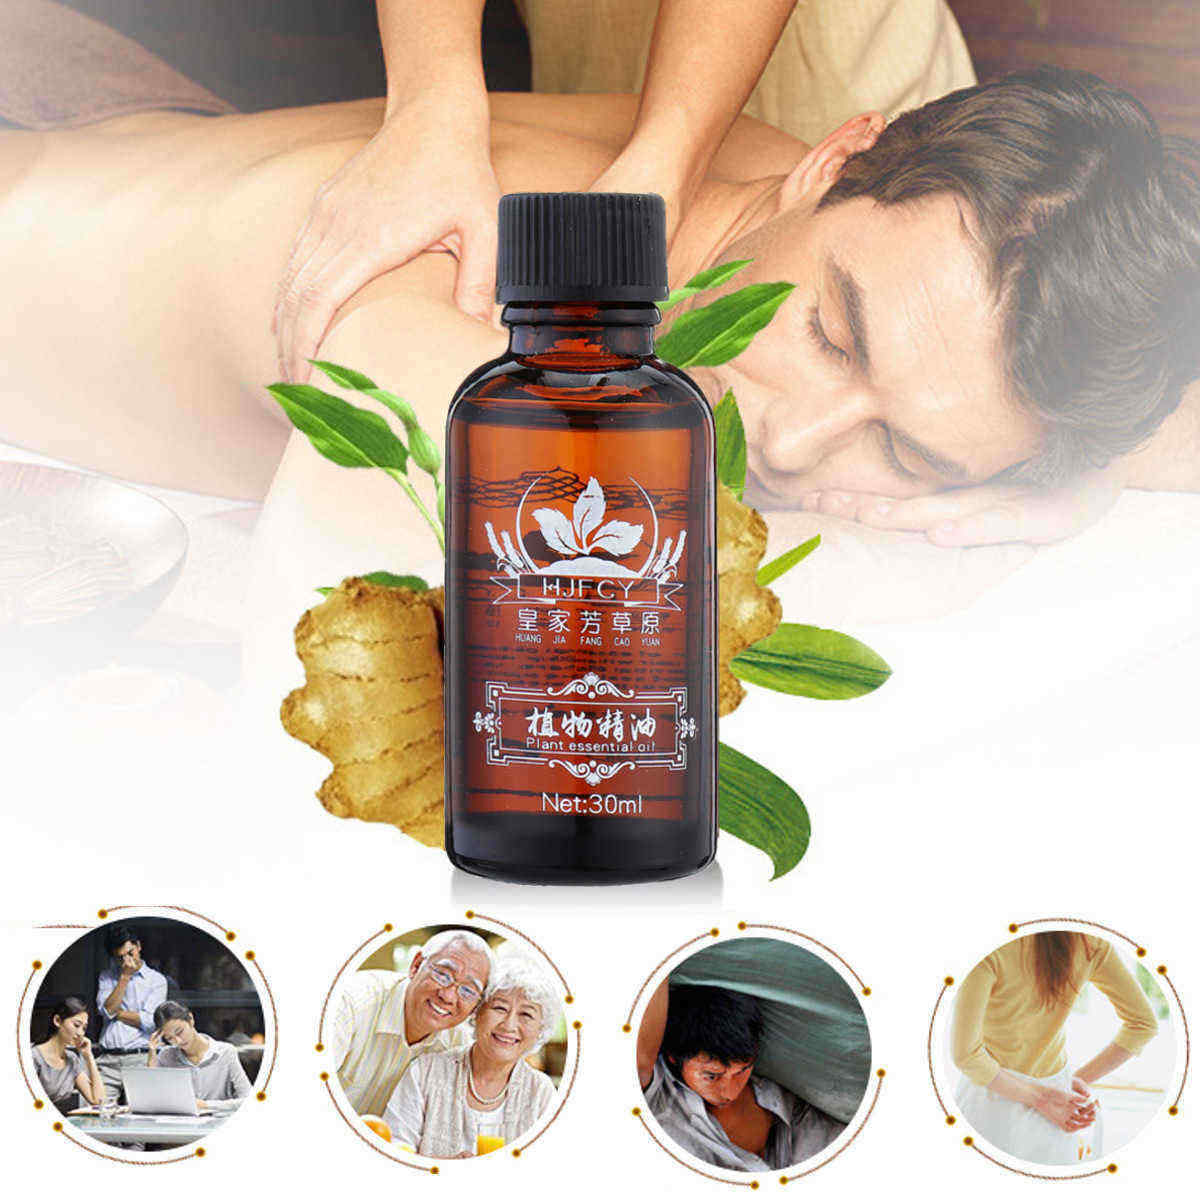 100-Natural-Plant-Therapy-Lymphatic-Drainage-Ginger-Essential-Oil-Anti-Aging-Body-Massage-1335254